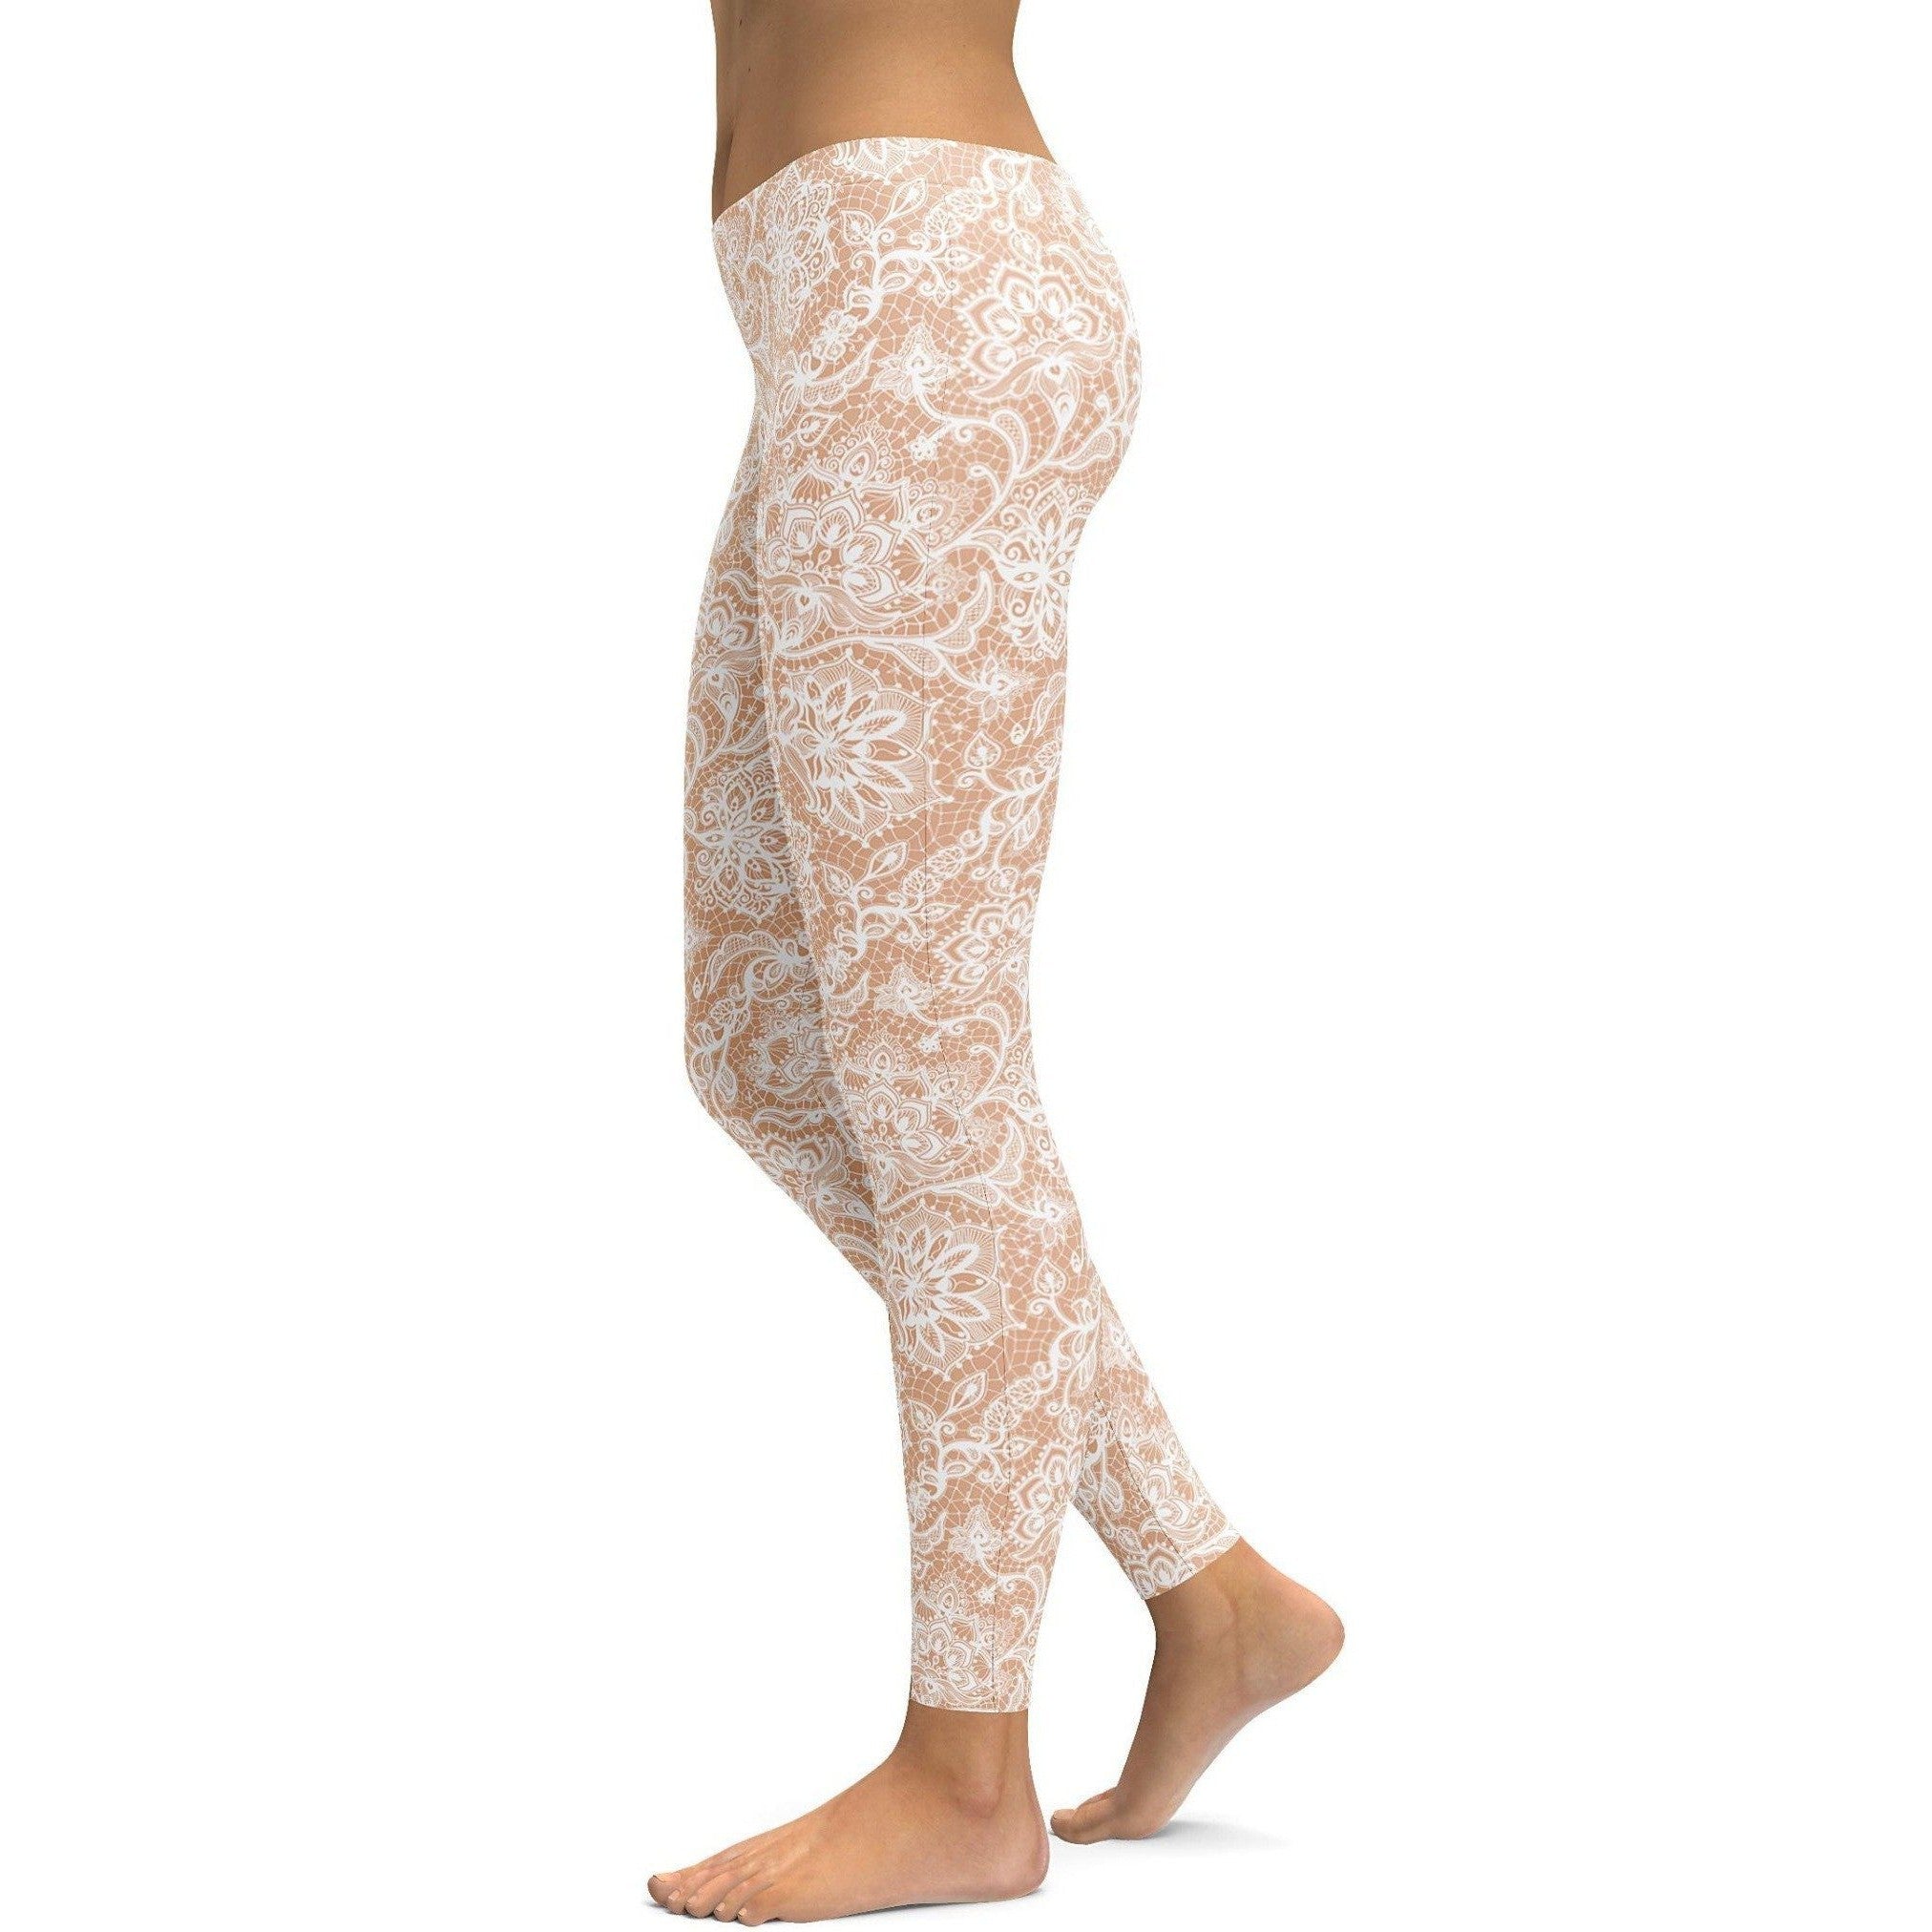 Only Hearts Stretch Lace Leggings Nude  Lace leggings, Nude leggings,  Stretch lace